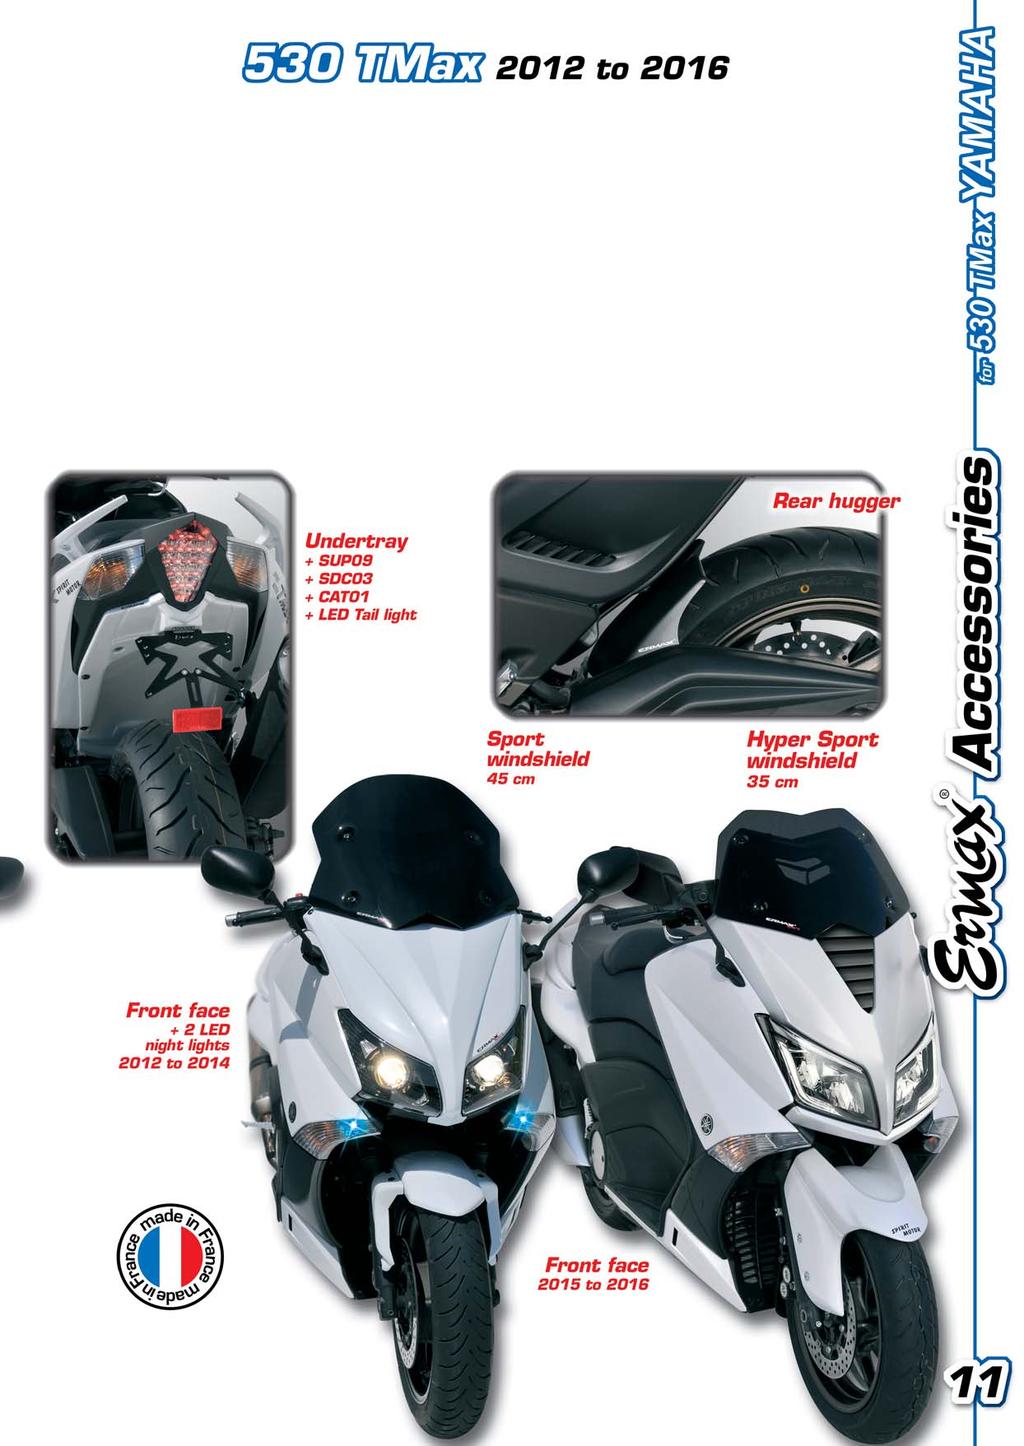 windshield Original Size windshield windshield Hyper windshield Undertray Rear hugger Front face 2012 to 2014 Front face 2015 to 2016 Tail light Approved 16 Silkscreens are available in option, view